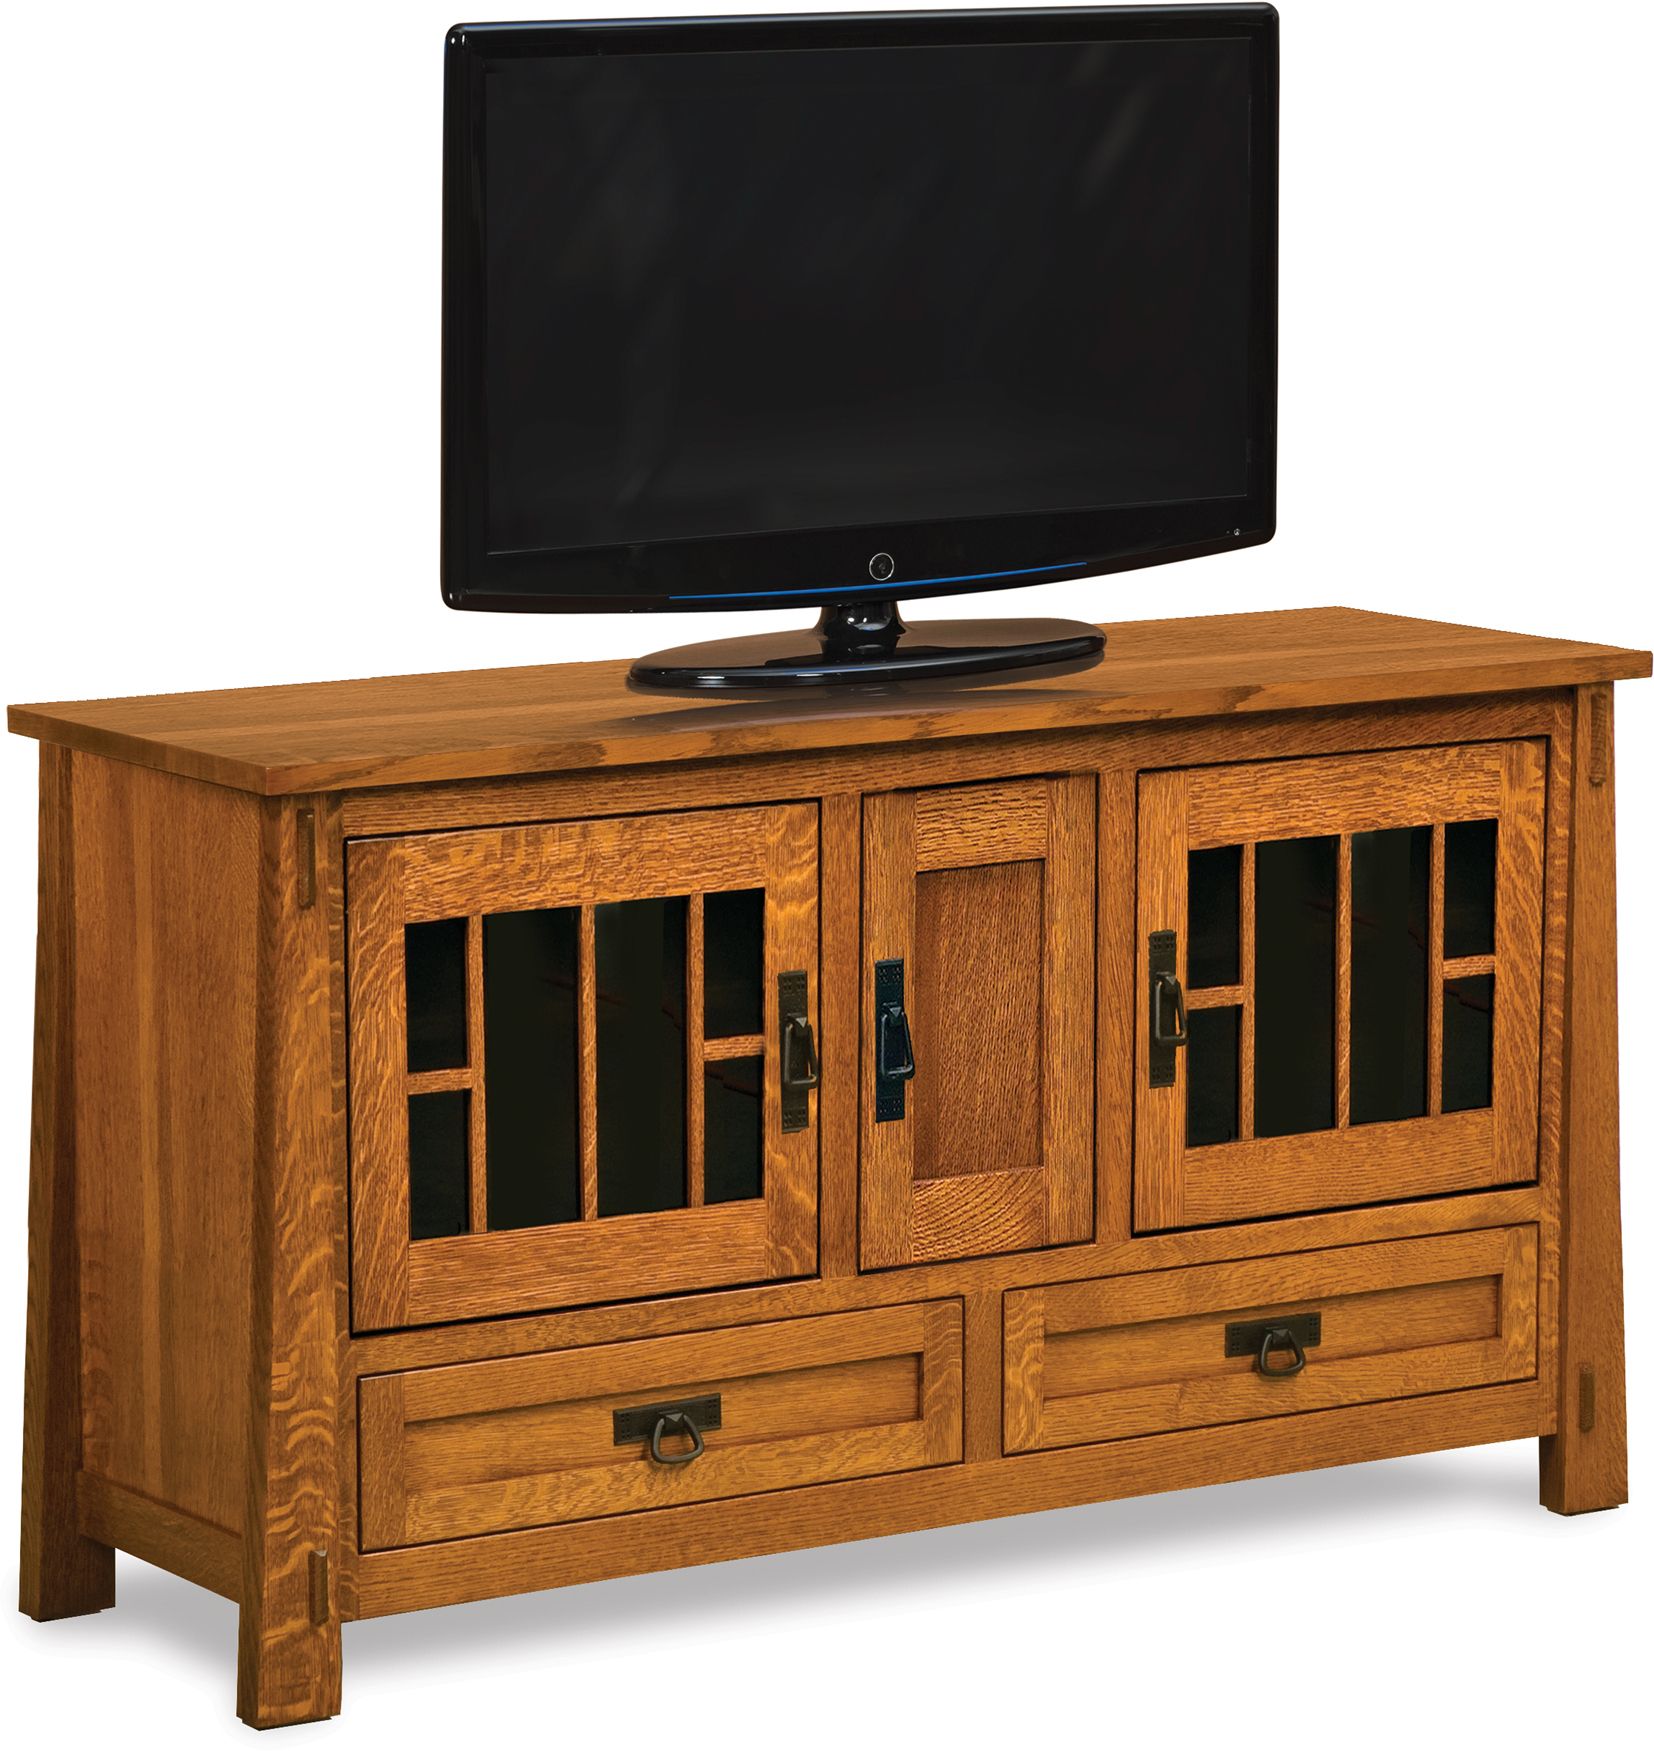 Modesto High Tv Stand | Indiana Amish Modesto Tall Lcd Stand Inside Elevated Tv Stands (Photo 8 of 15)